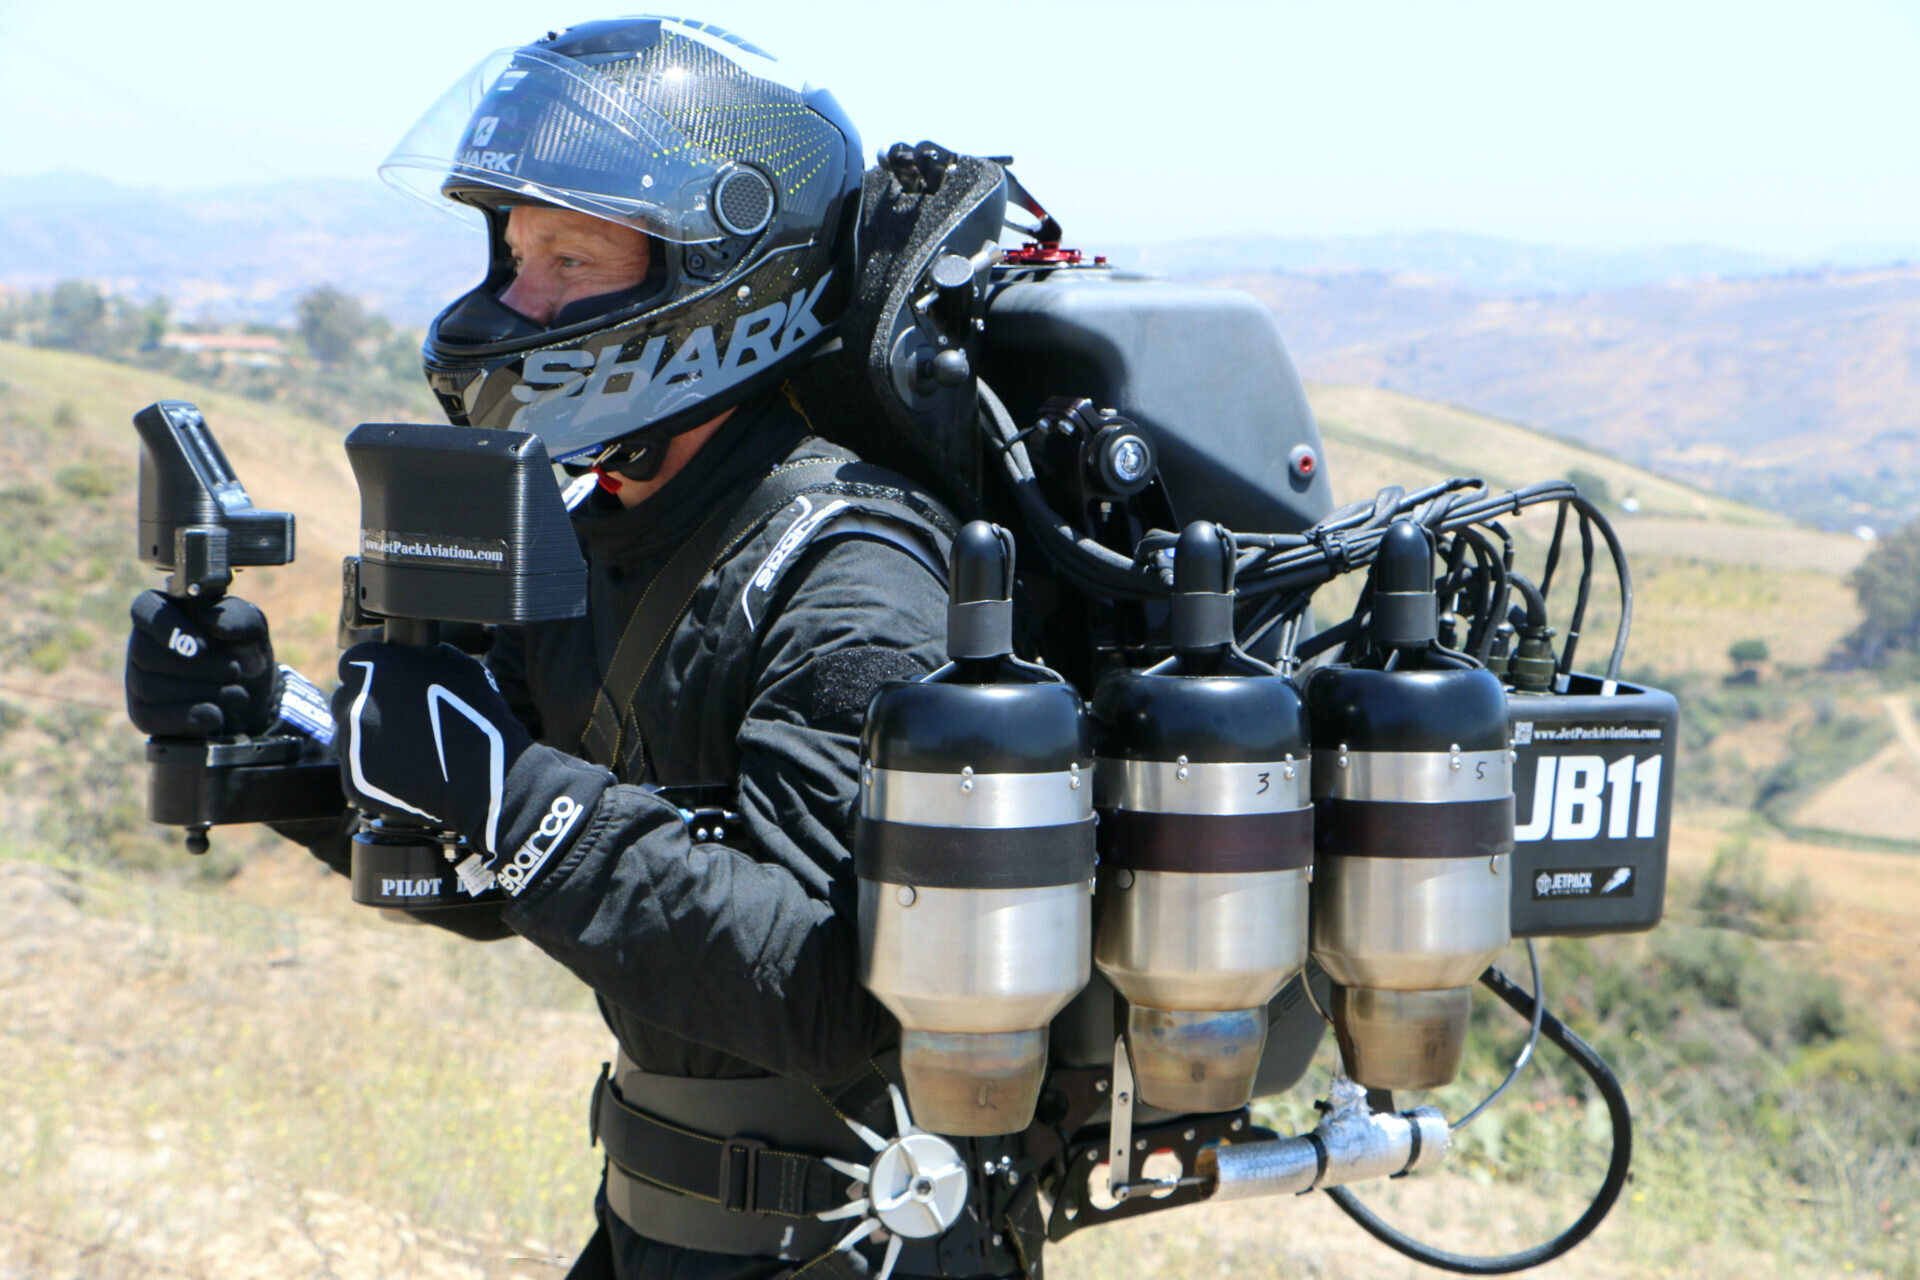 The JB12 jetpack is a classified model evolved from the JB11 (pictured).